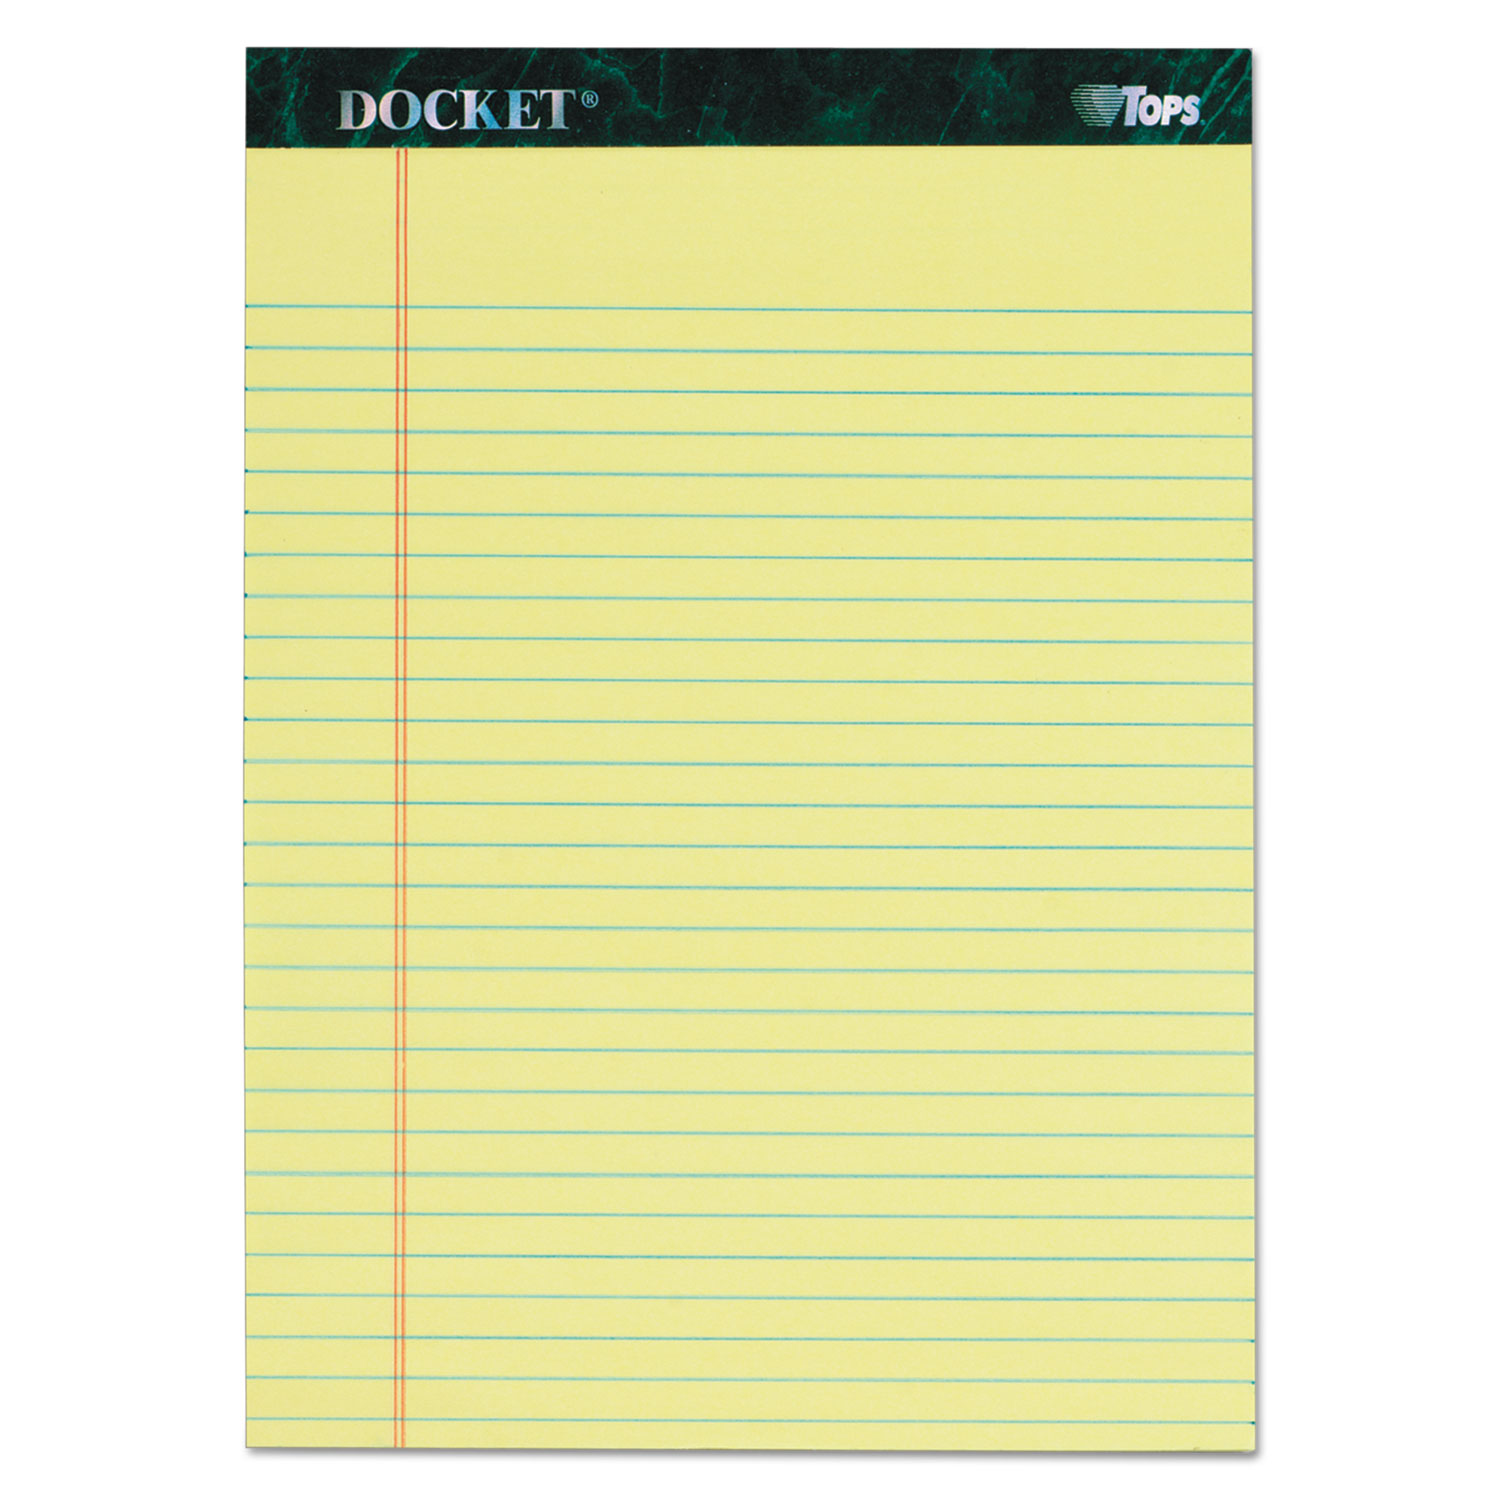  TOPS 63406 Docket Ruled Perforated Pads, Wide/Legal Rule, 8.5 x 11.75, Canary, 50 Sheets, 6/Pack (TOP63406) 